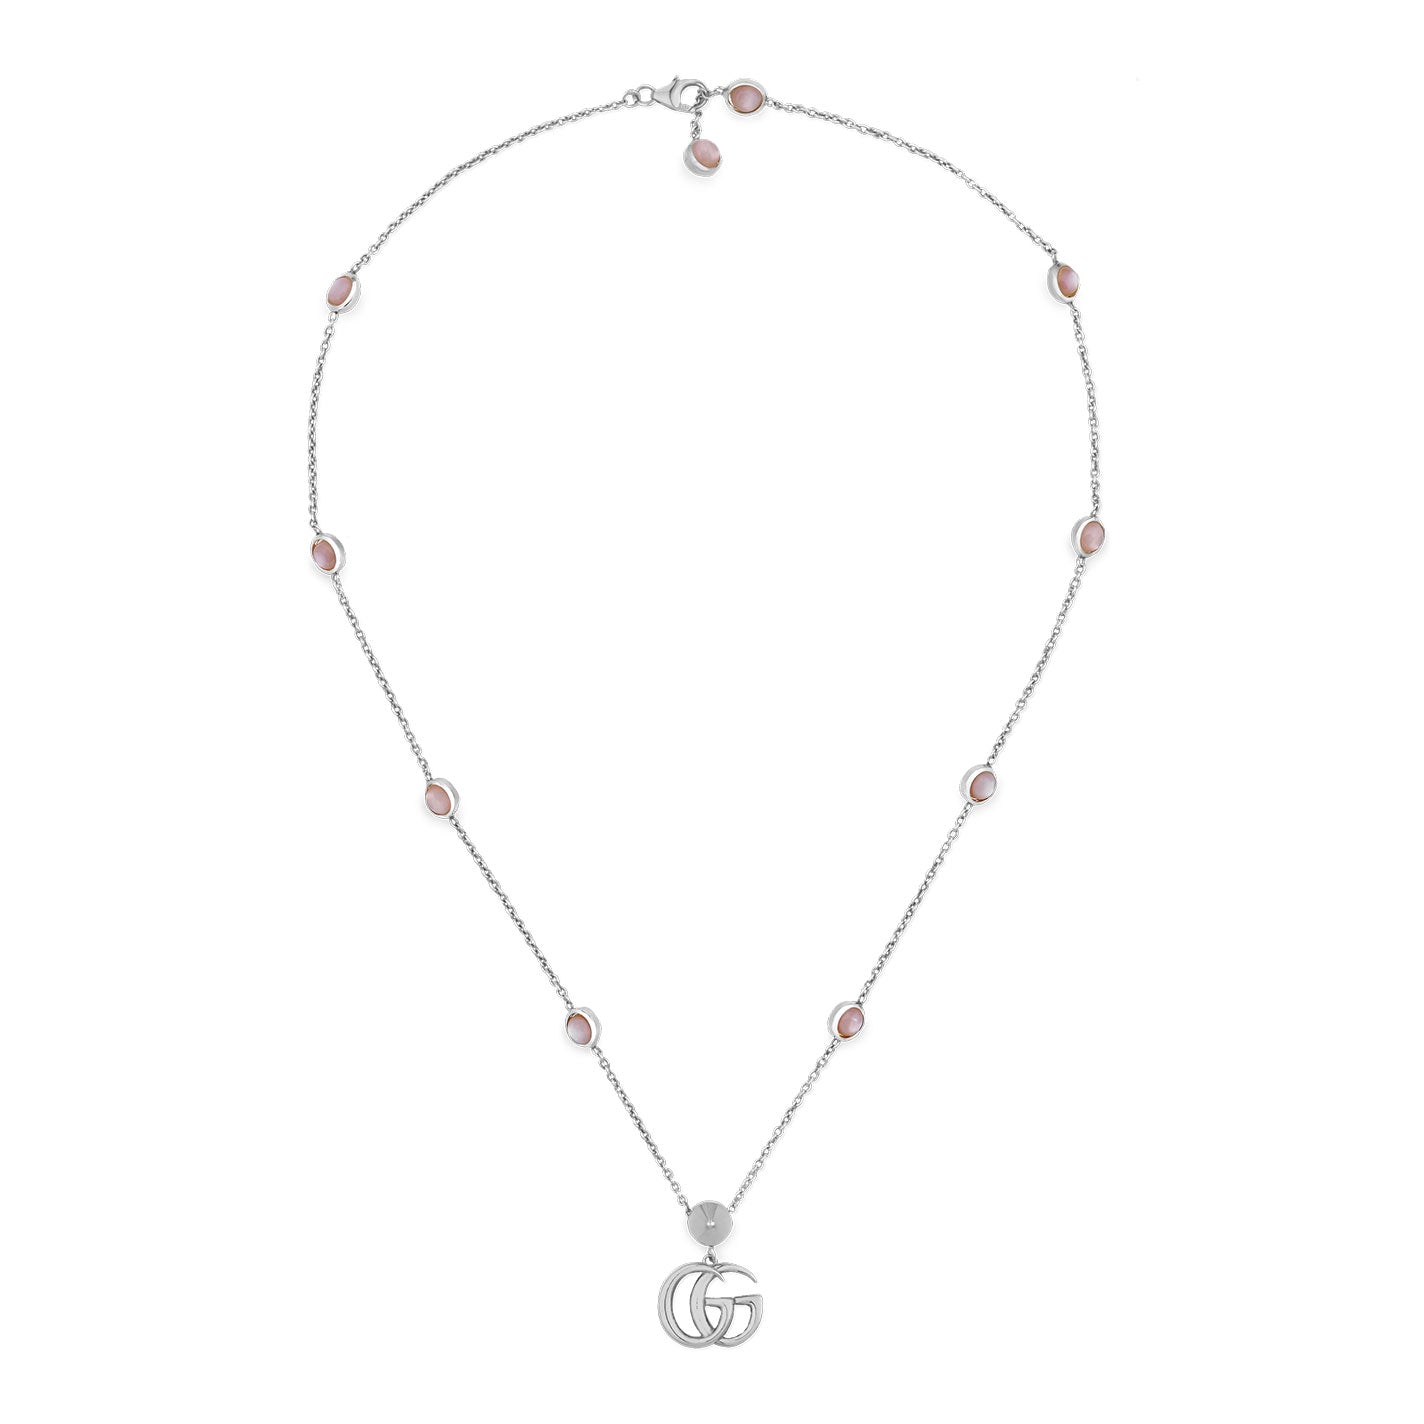 Gucci Double G Pink Mother of Pearl Sterling Silver Station Necklace Pendant